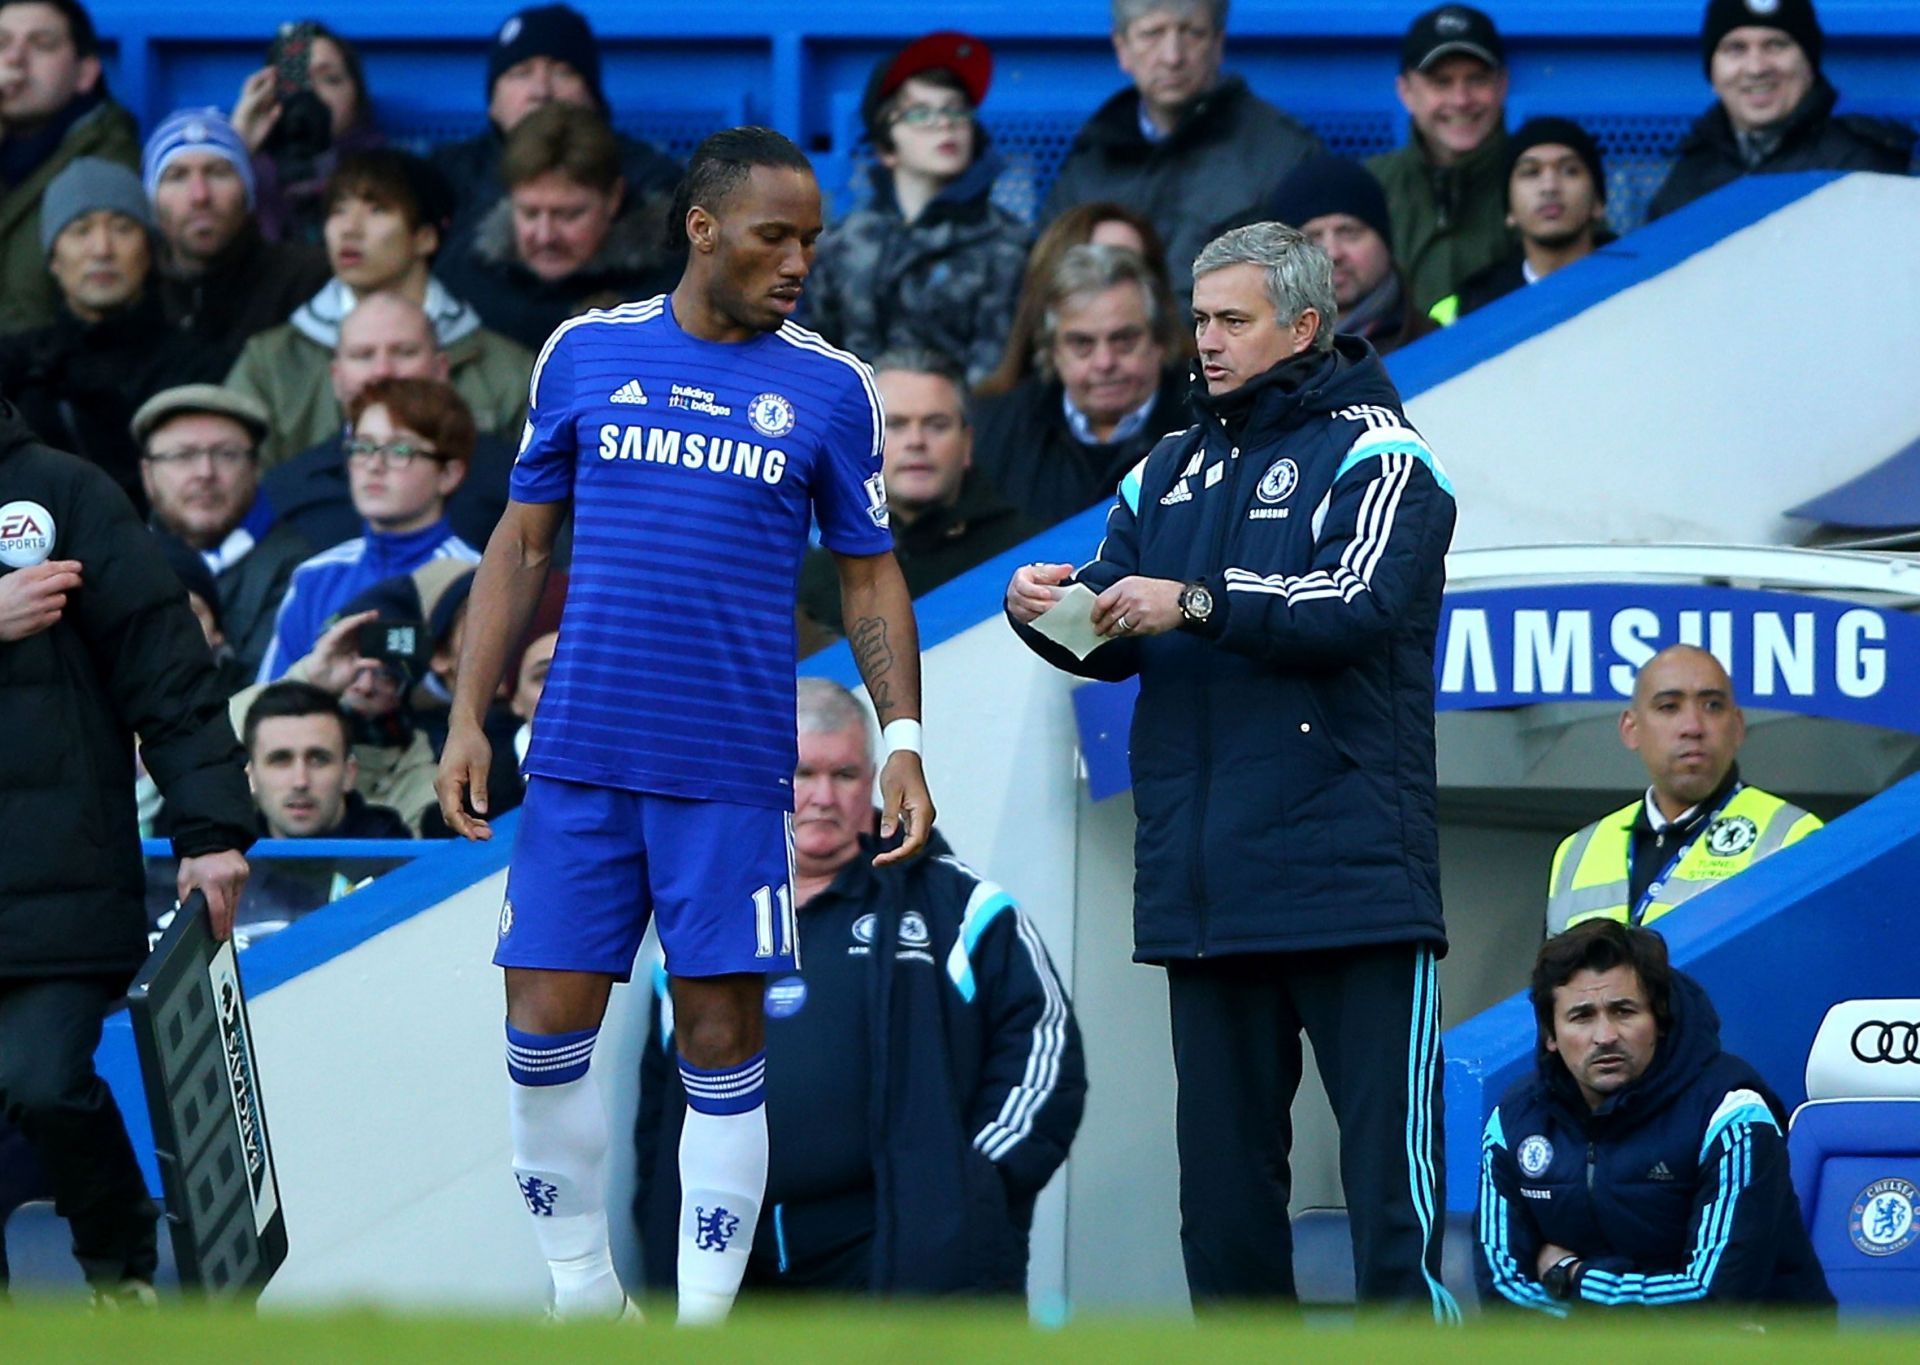 Didier Drogba (left) was one of the star performers under Mourinho (right).